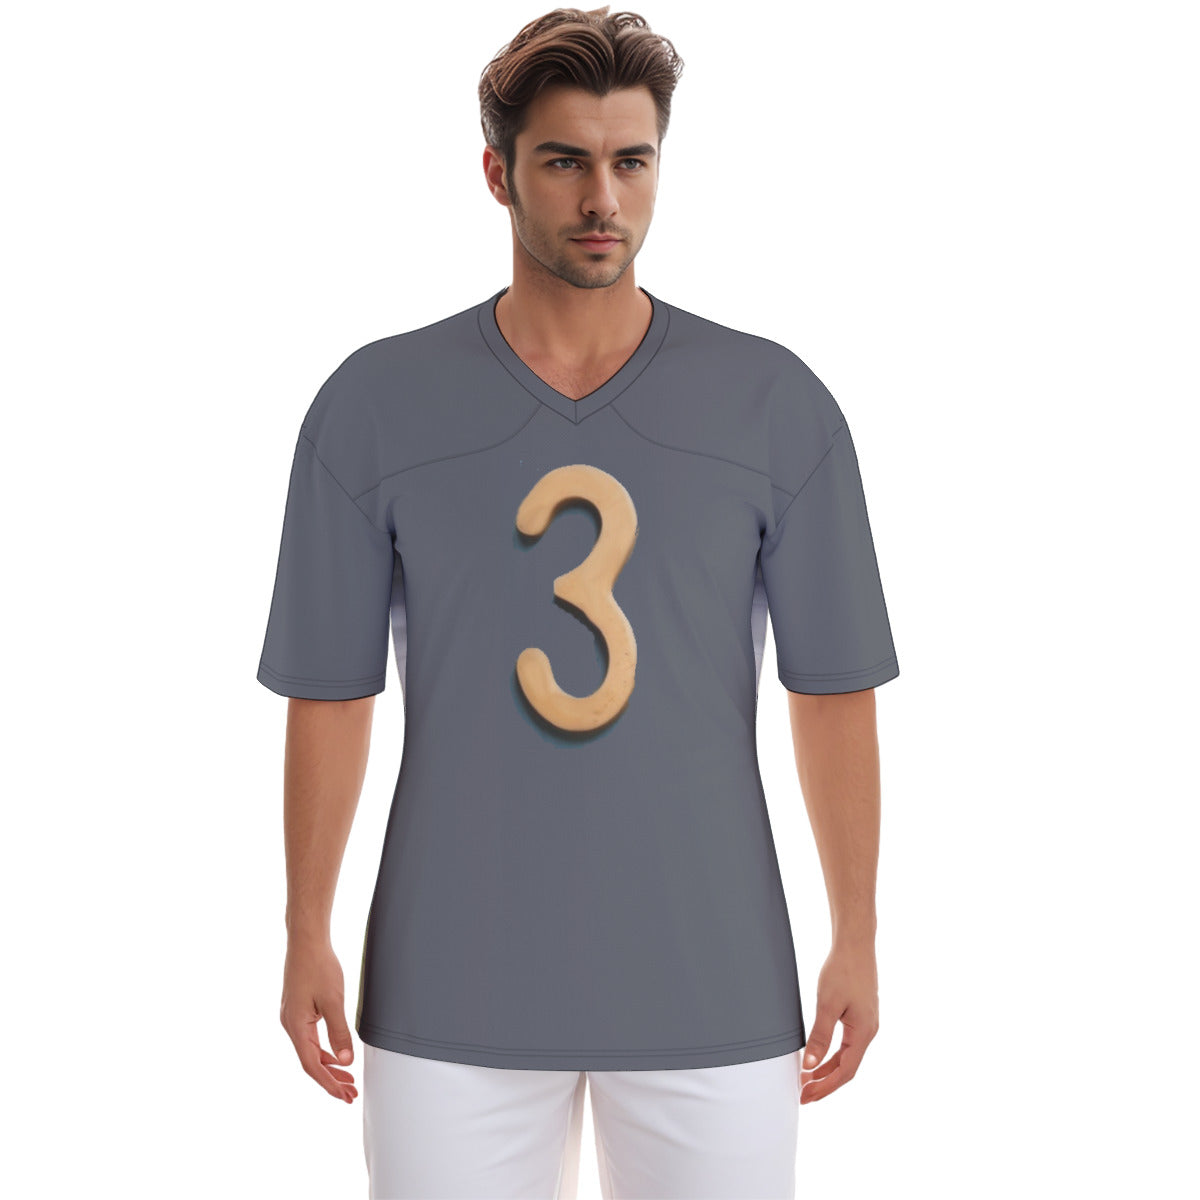 The Pitch -- Men's Football  Jersey